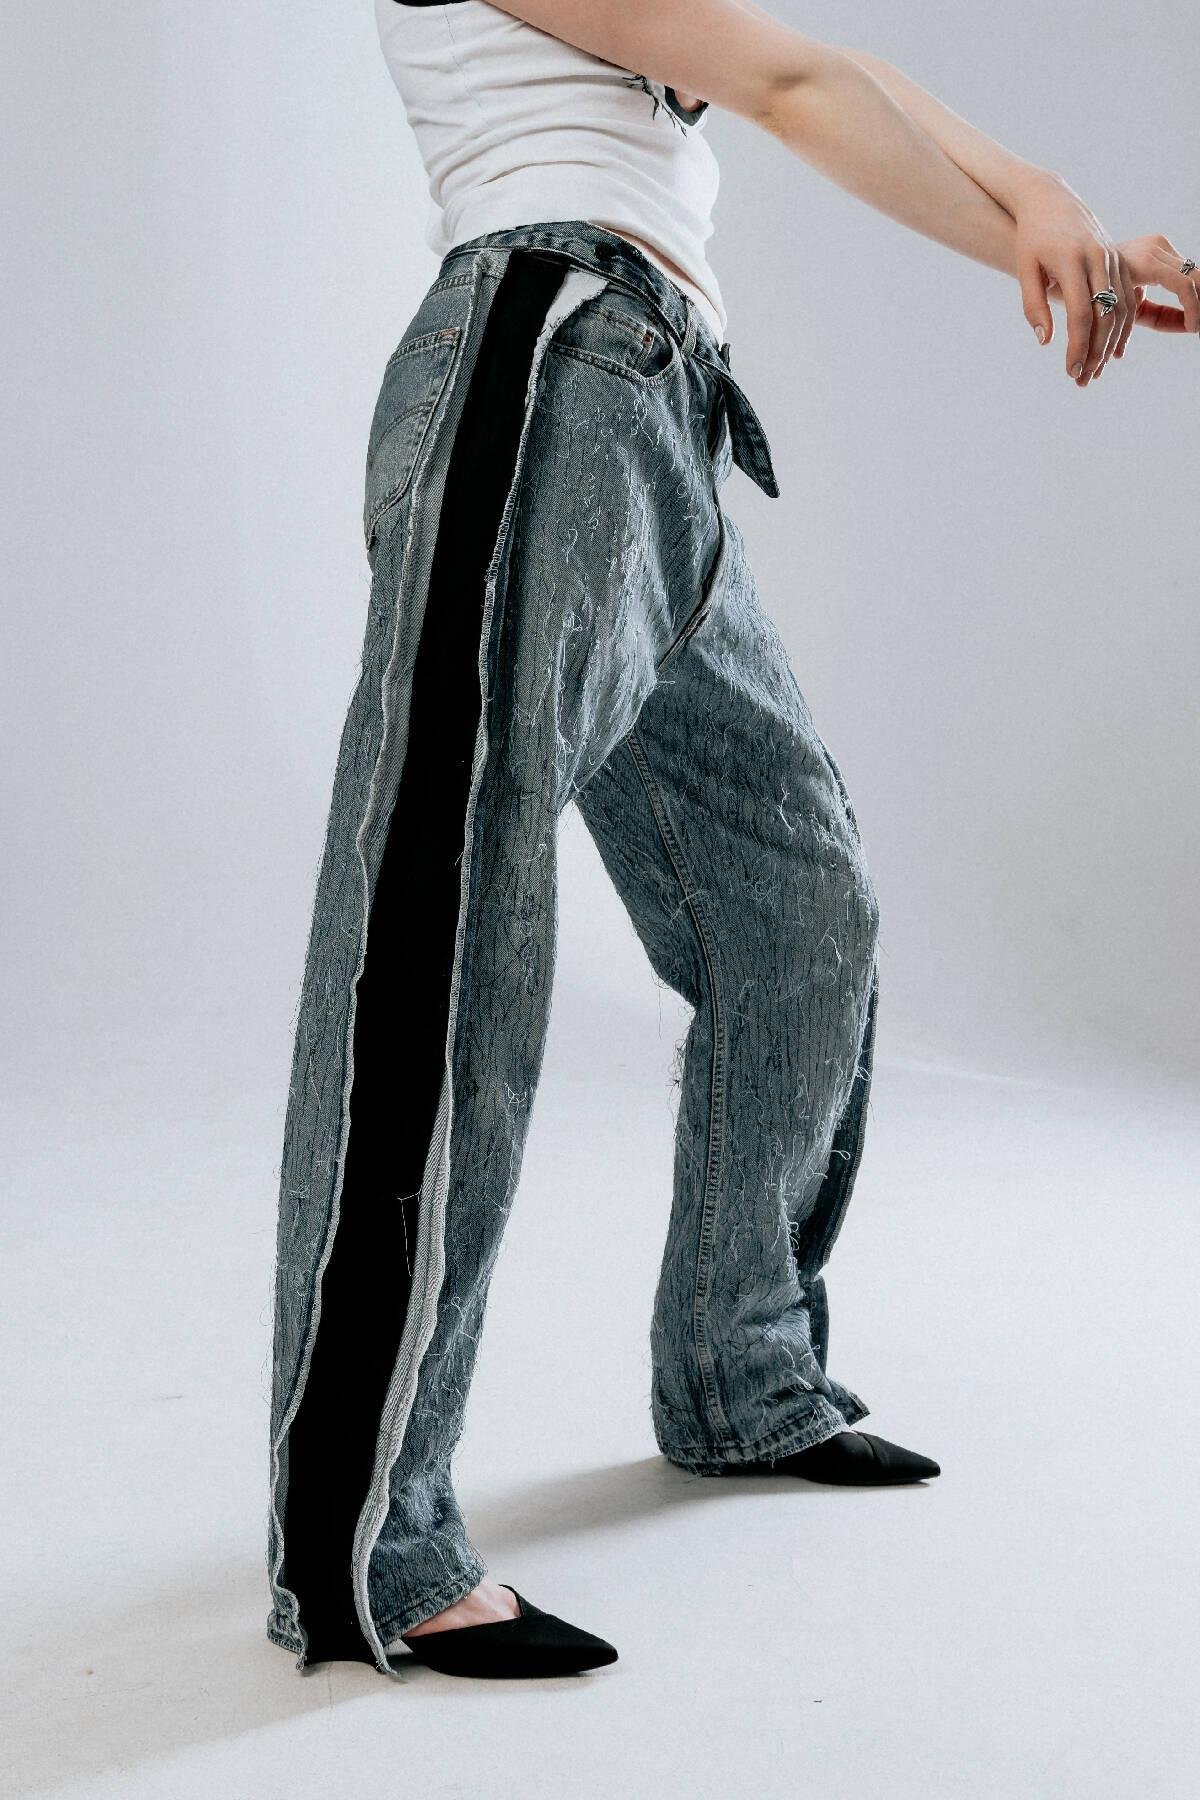 Embroidered Denim Trousers by ARTURRYBA